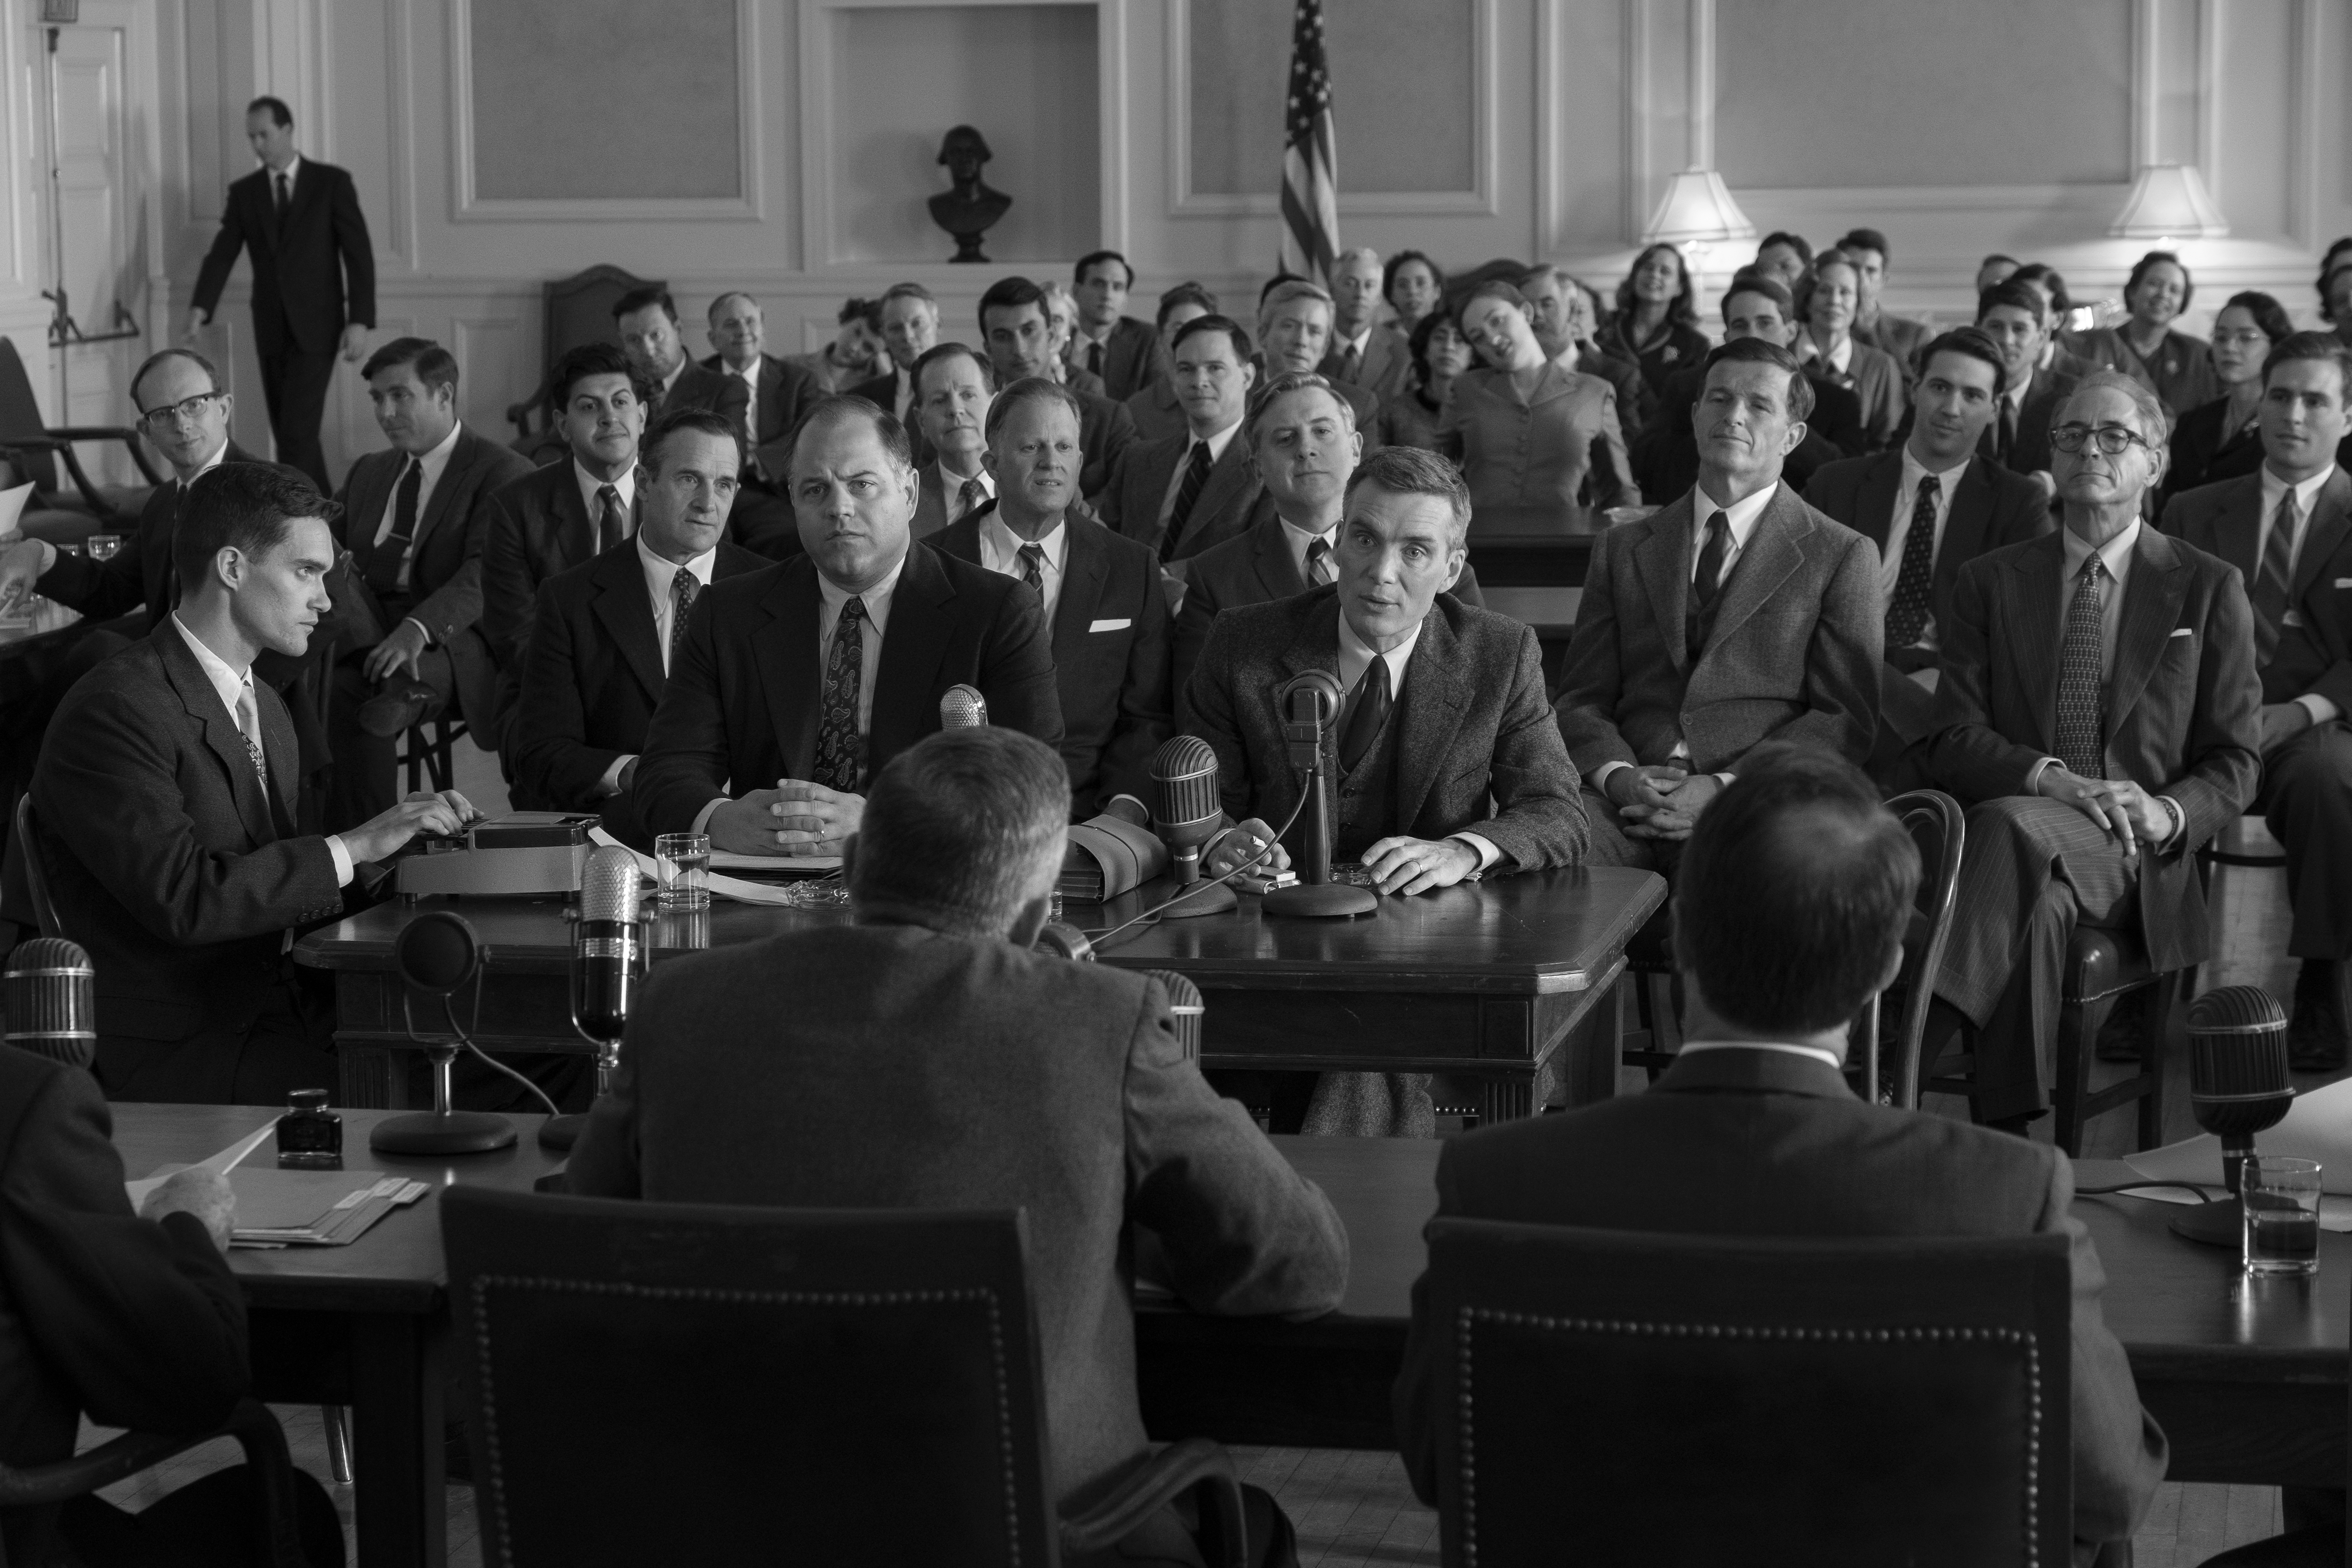 Black and white HD desktop wallpaper featuring a historical setting with a group of men in suits at what appears to be a government hearing, tagged with Oppenheimer.